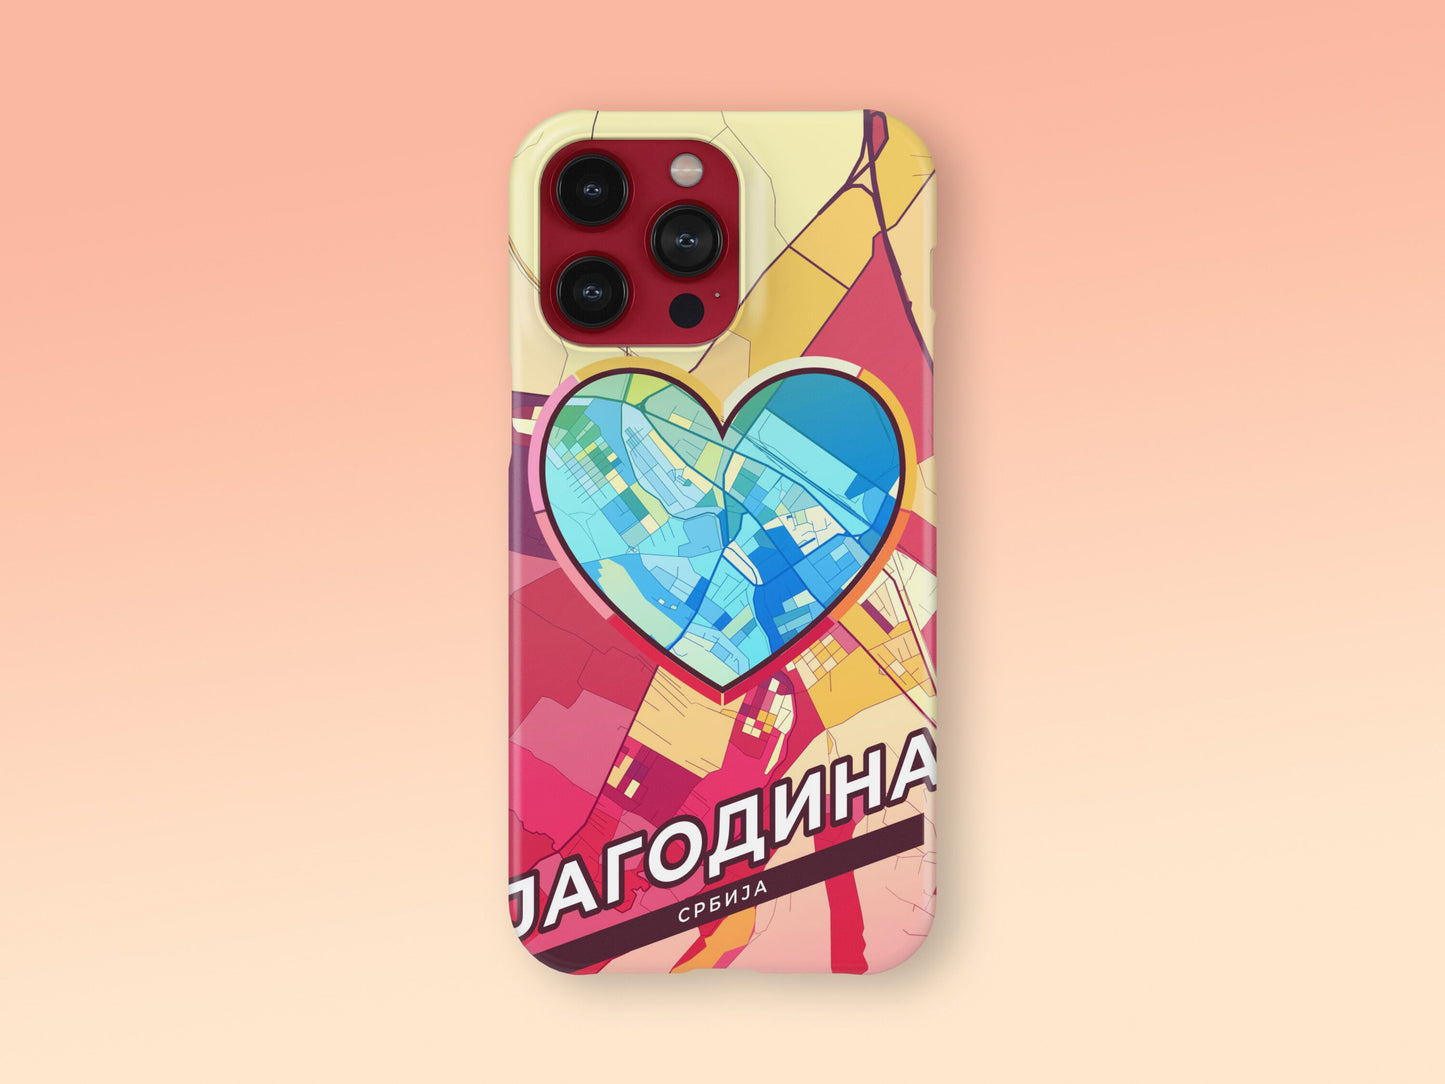 Jagodina Serbia slim phone case with colorful icon. Birthday, wedding or housewarming gift. Couple match cases. 2